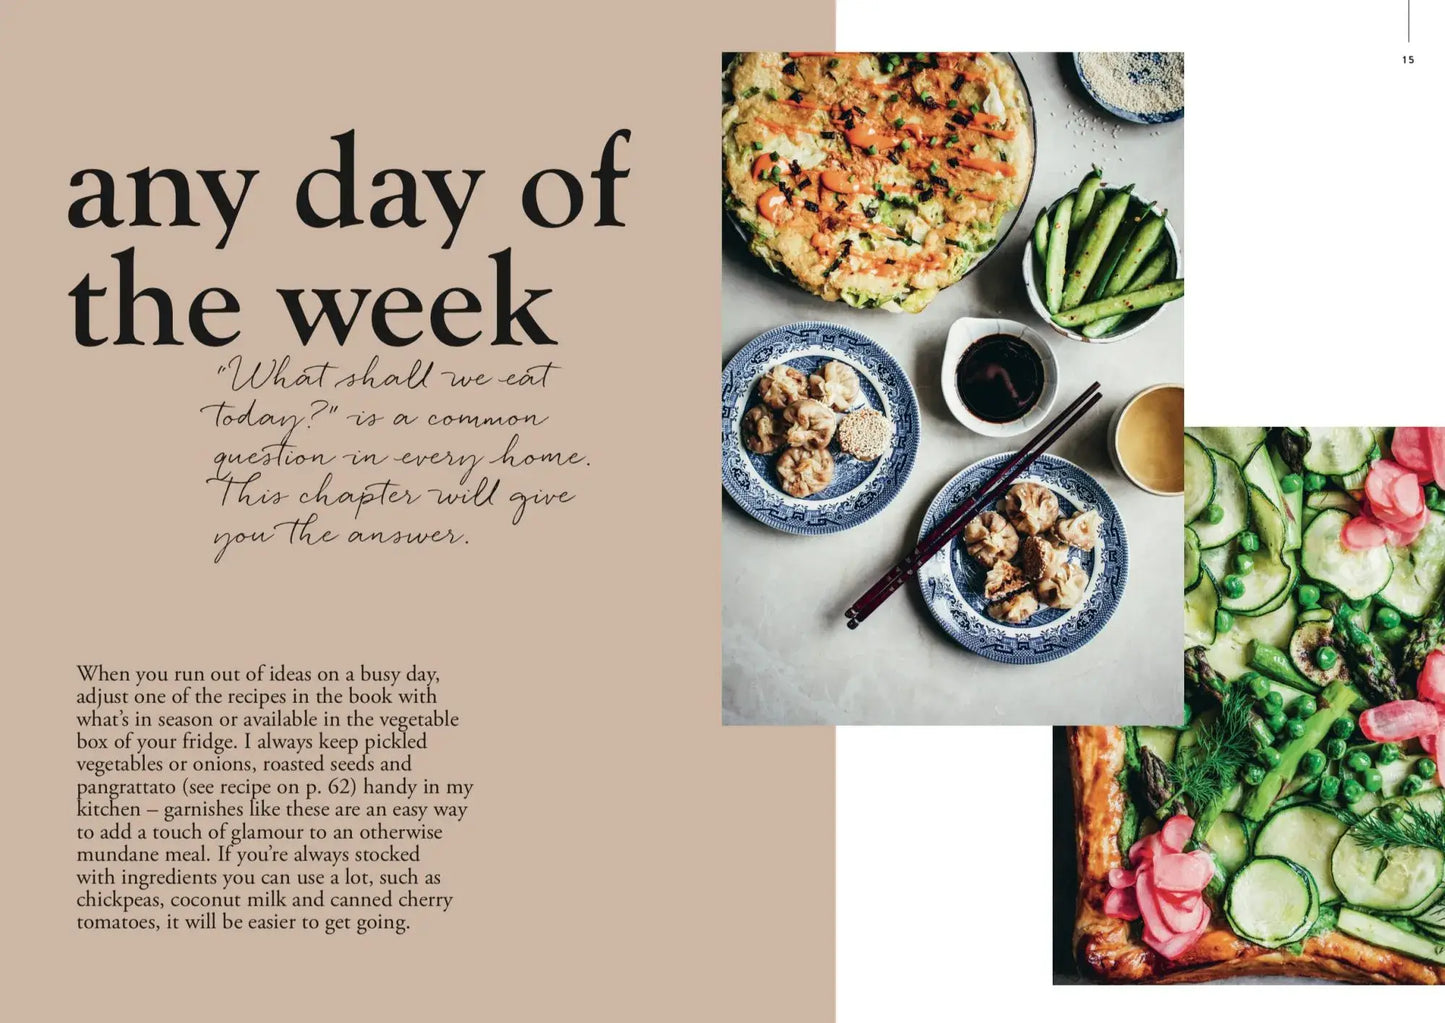 Veggies, Every Day Of The Week recipe book  by Cozy Publishing